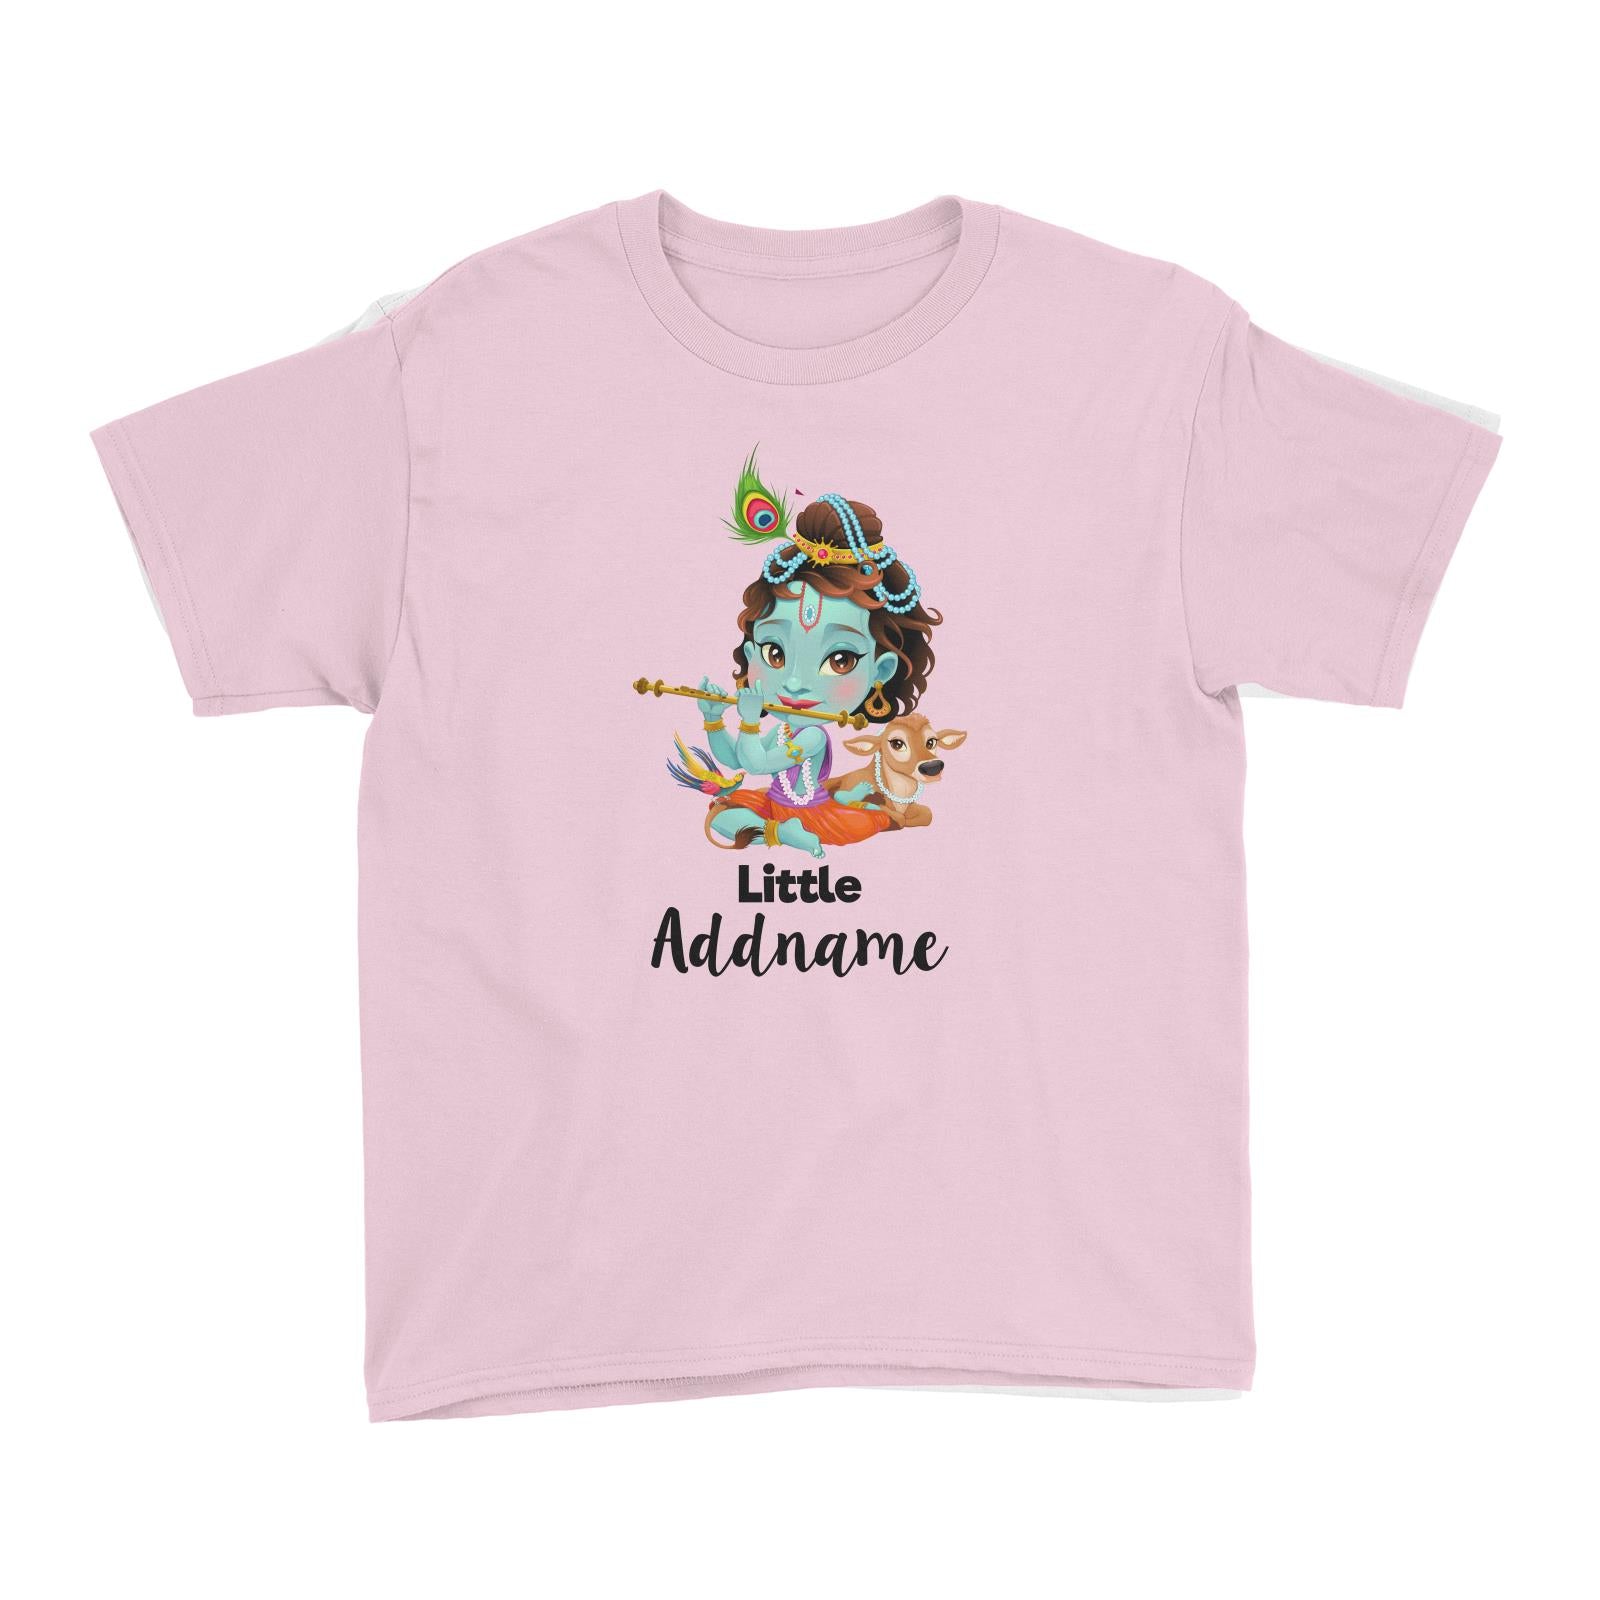 Artistic Krishna Playing Flute with Cow Little Addname Kid's T-Shirt